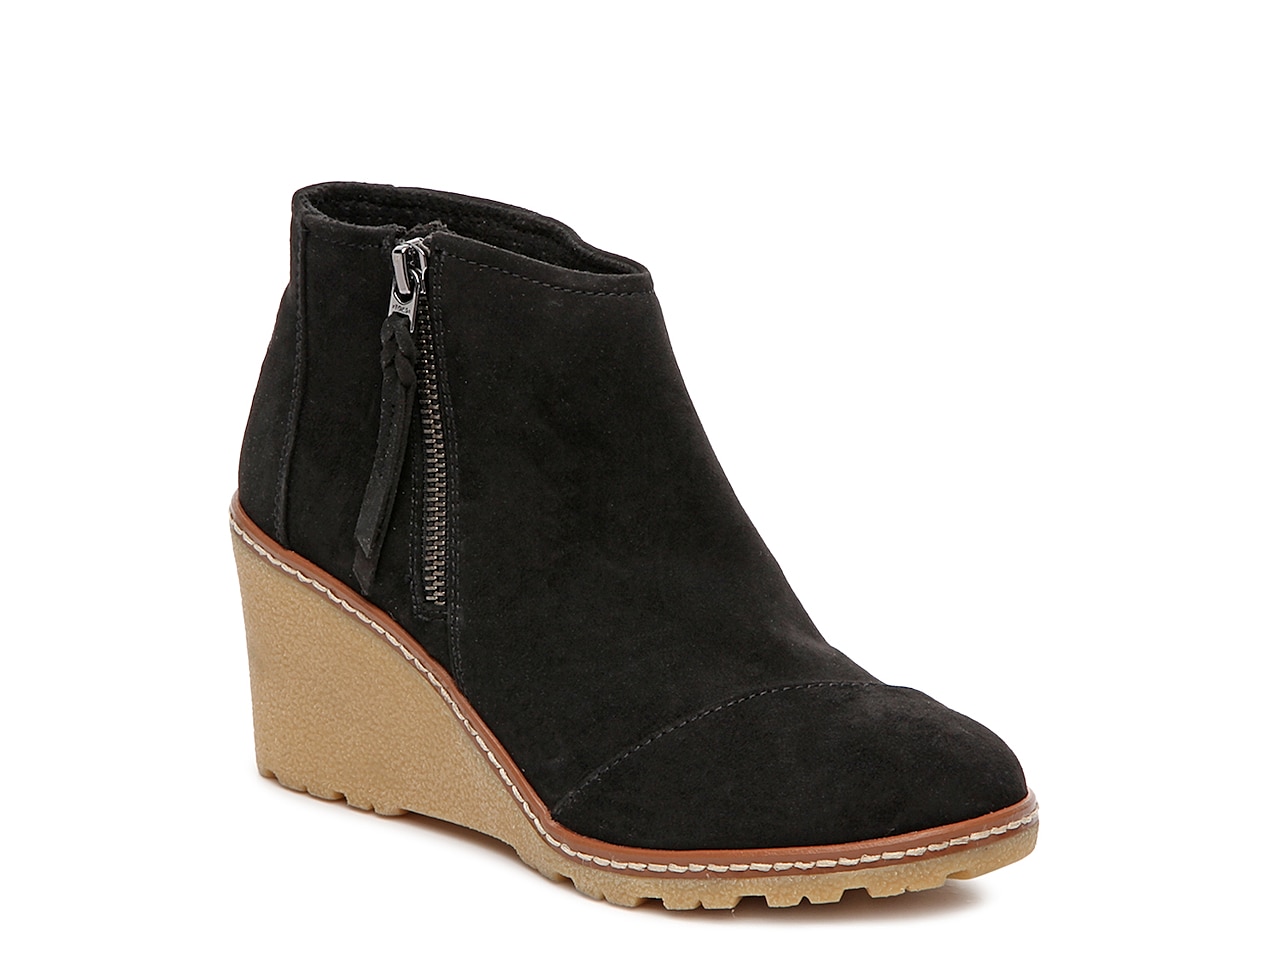 TOMS Avery Wedge Bootie Women's Shoes | DSW